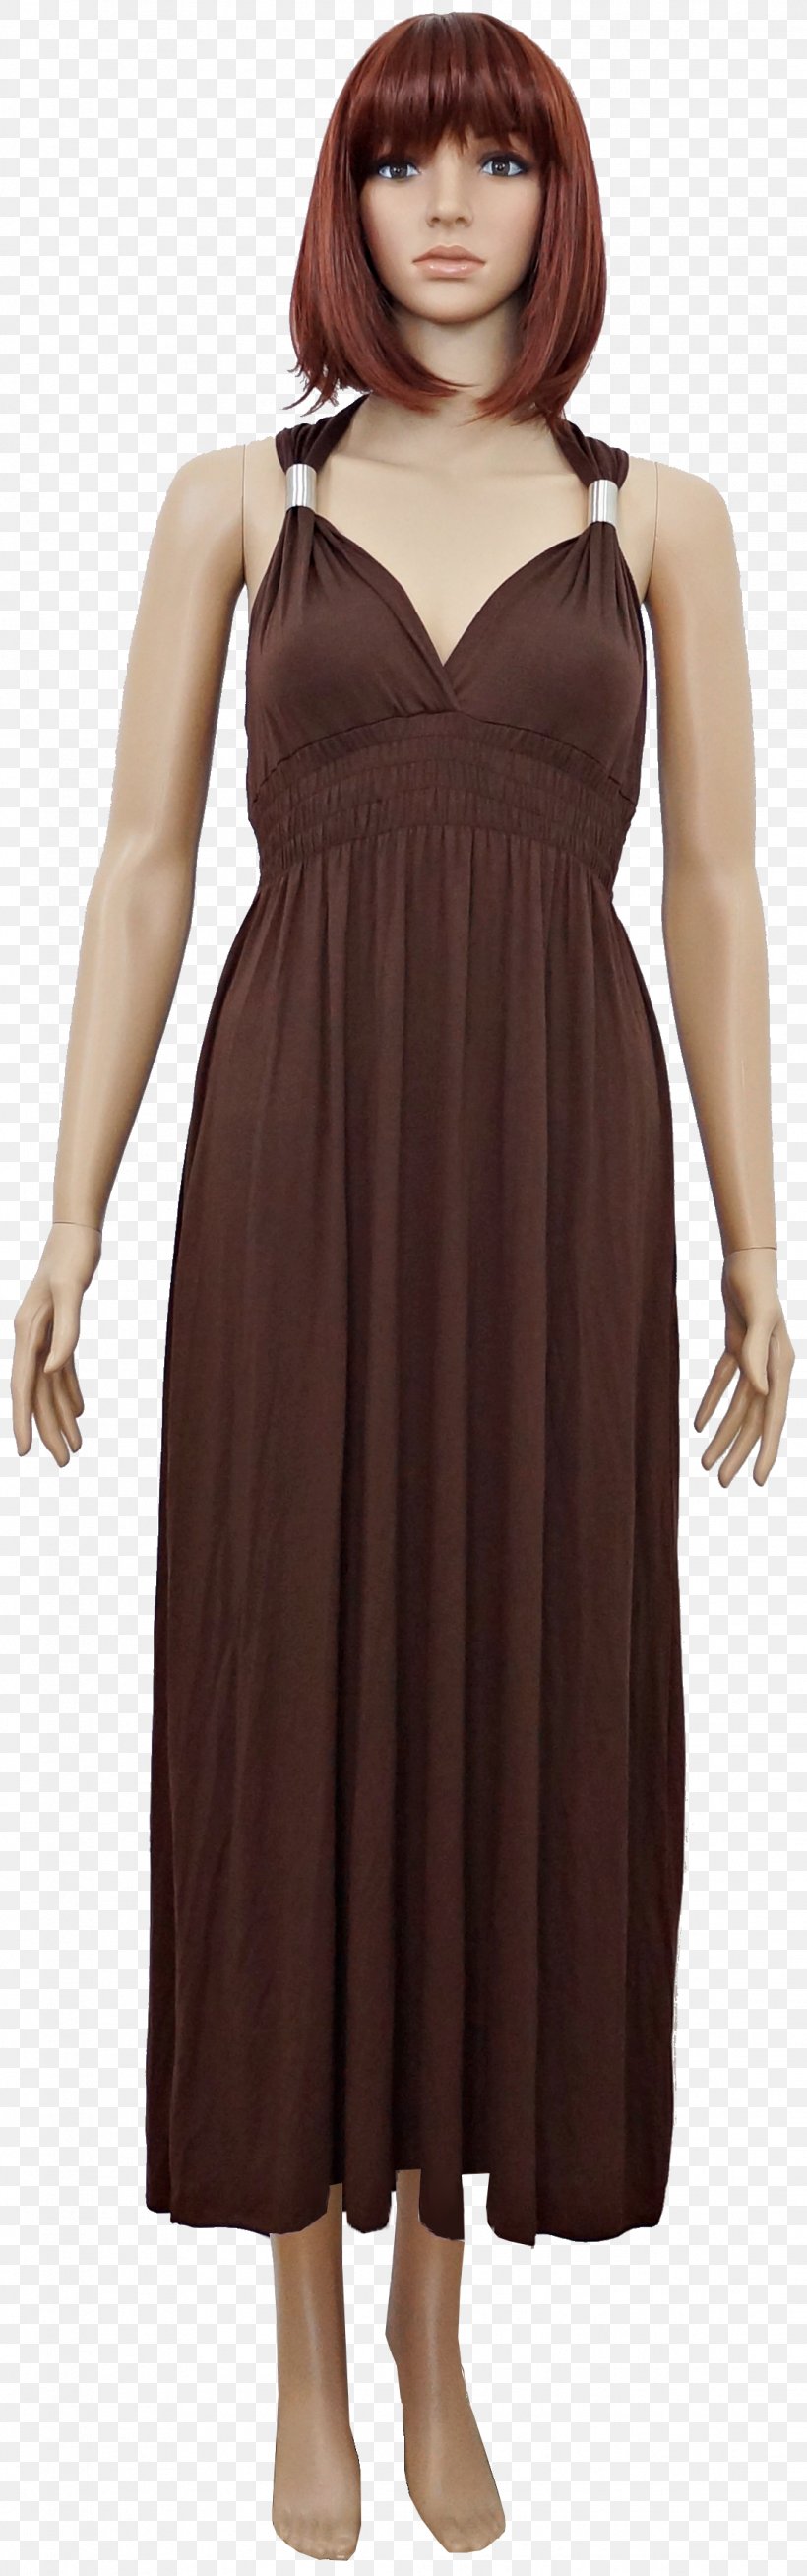 Neck Costume Dress, PNG, 1119x3571px, Neck, Brown, Clothing, Costume, Day Dress Download Free